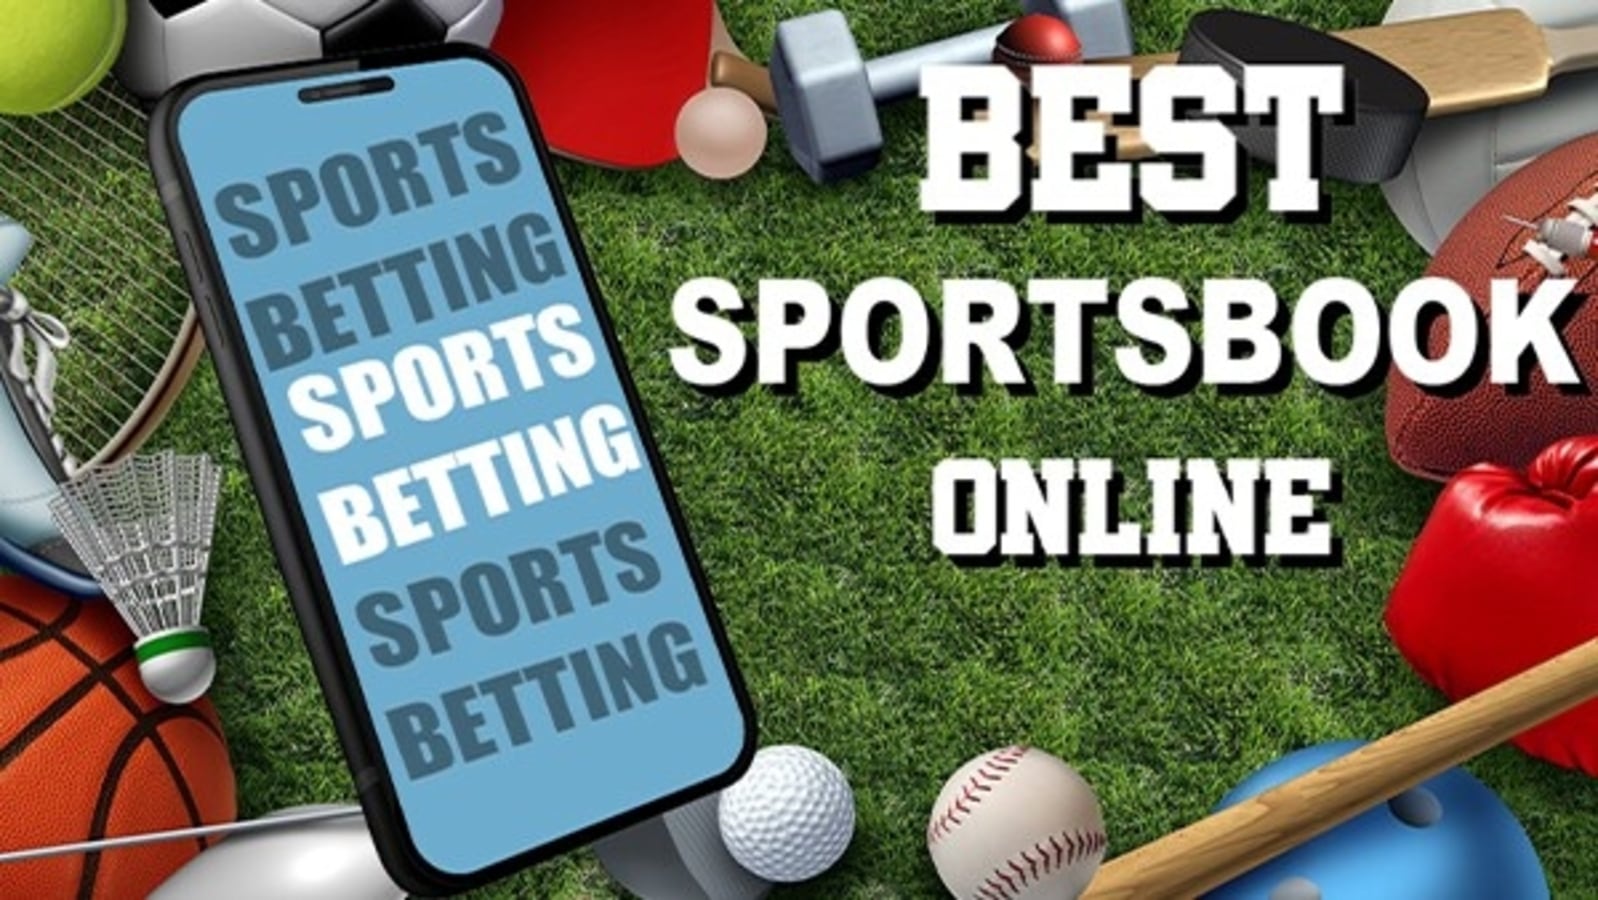 10 Best Online Sportsbooks and the Top Sports Betting Sites in 2022